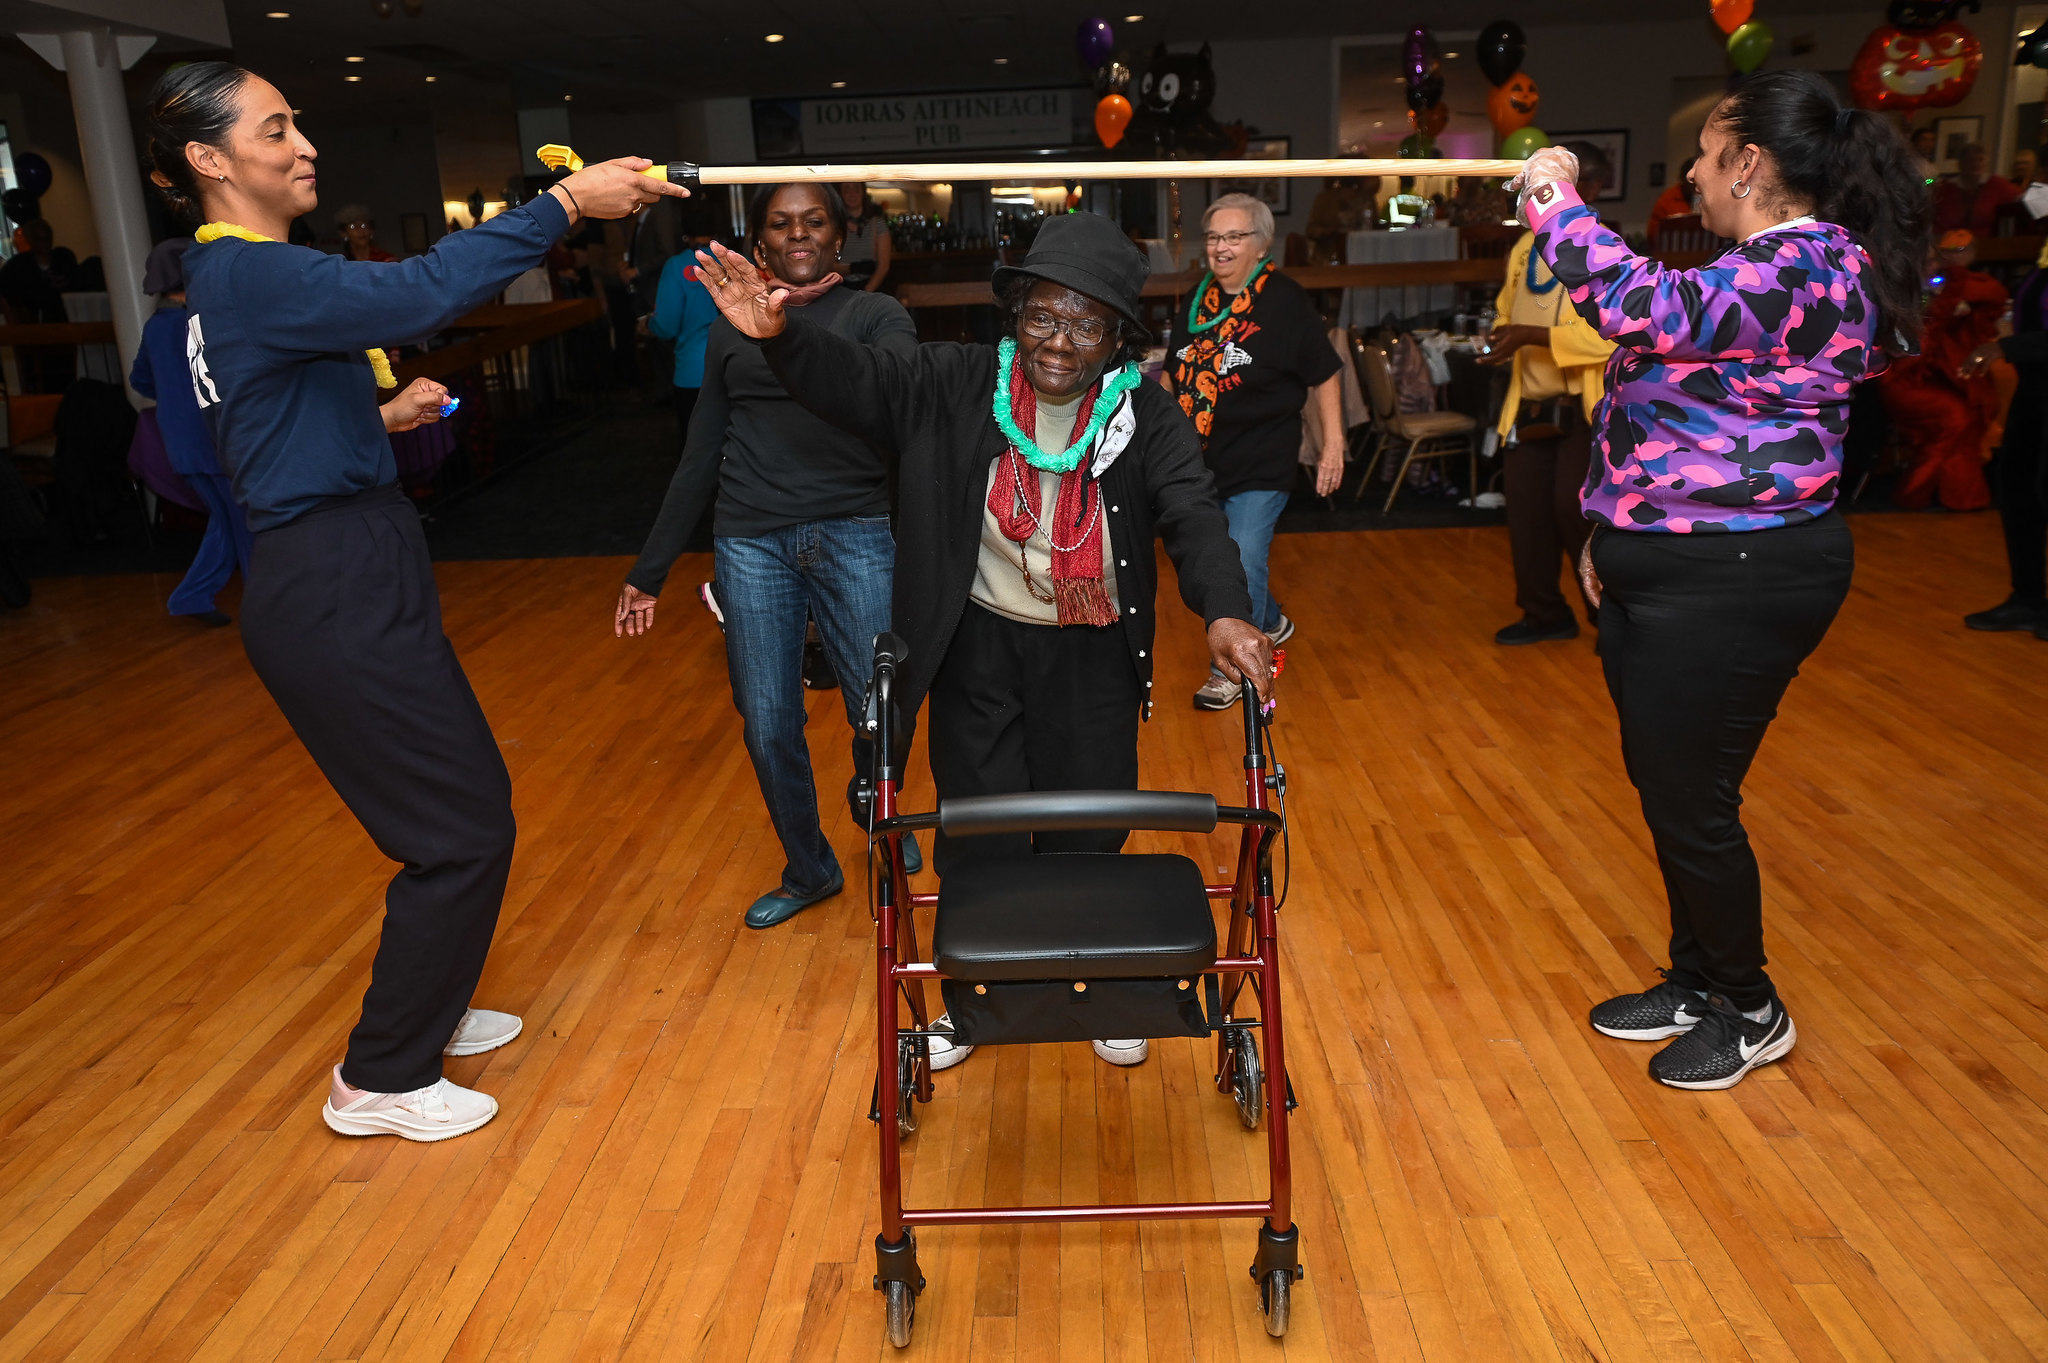 Limbo activity at an event for older adults